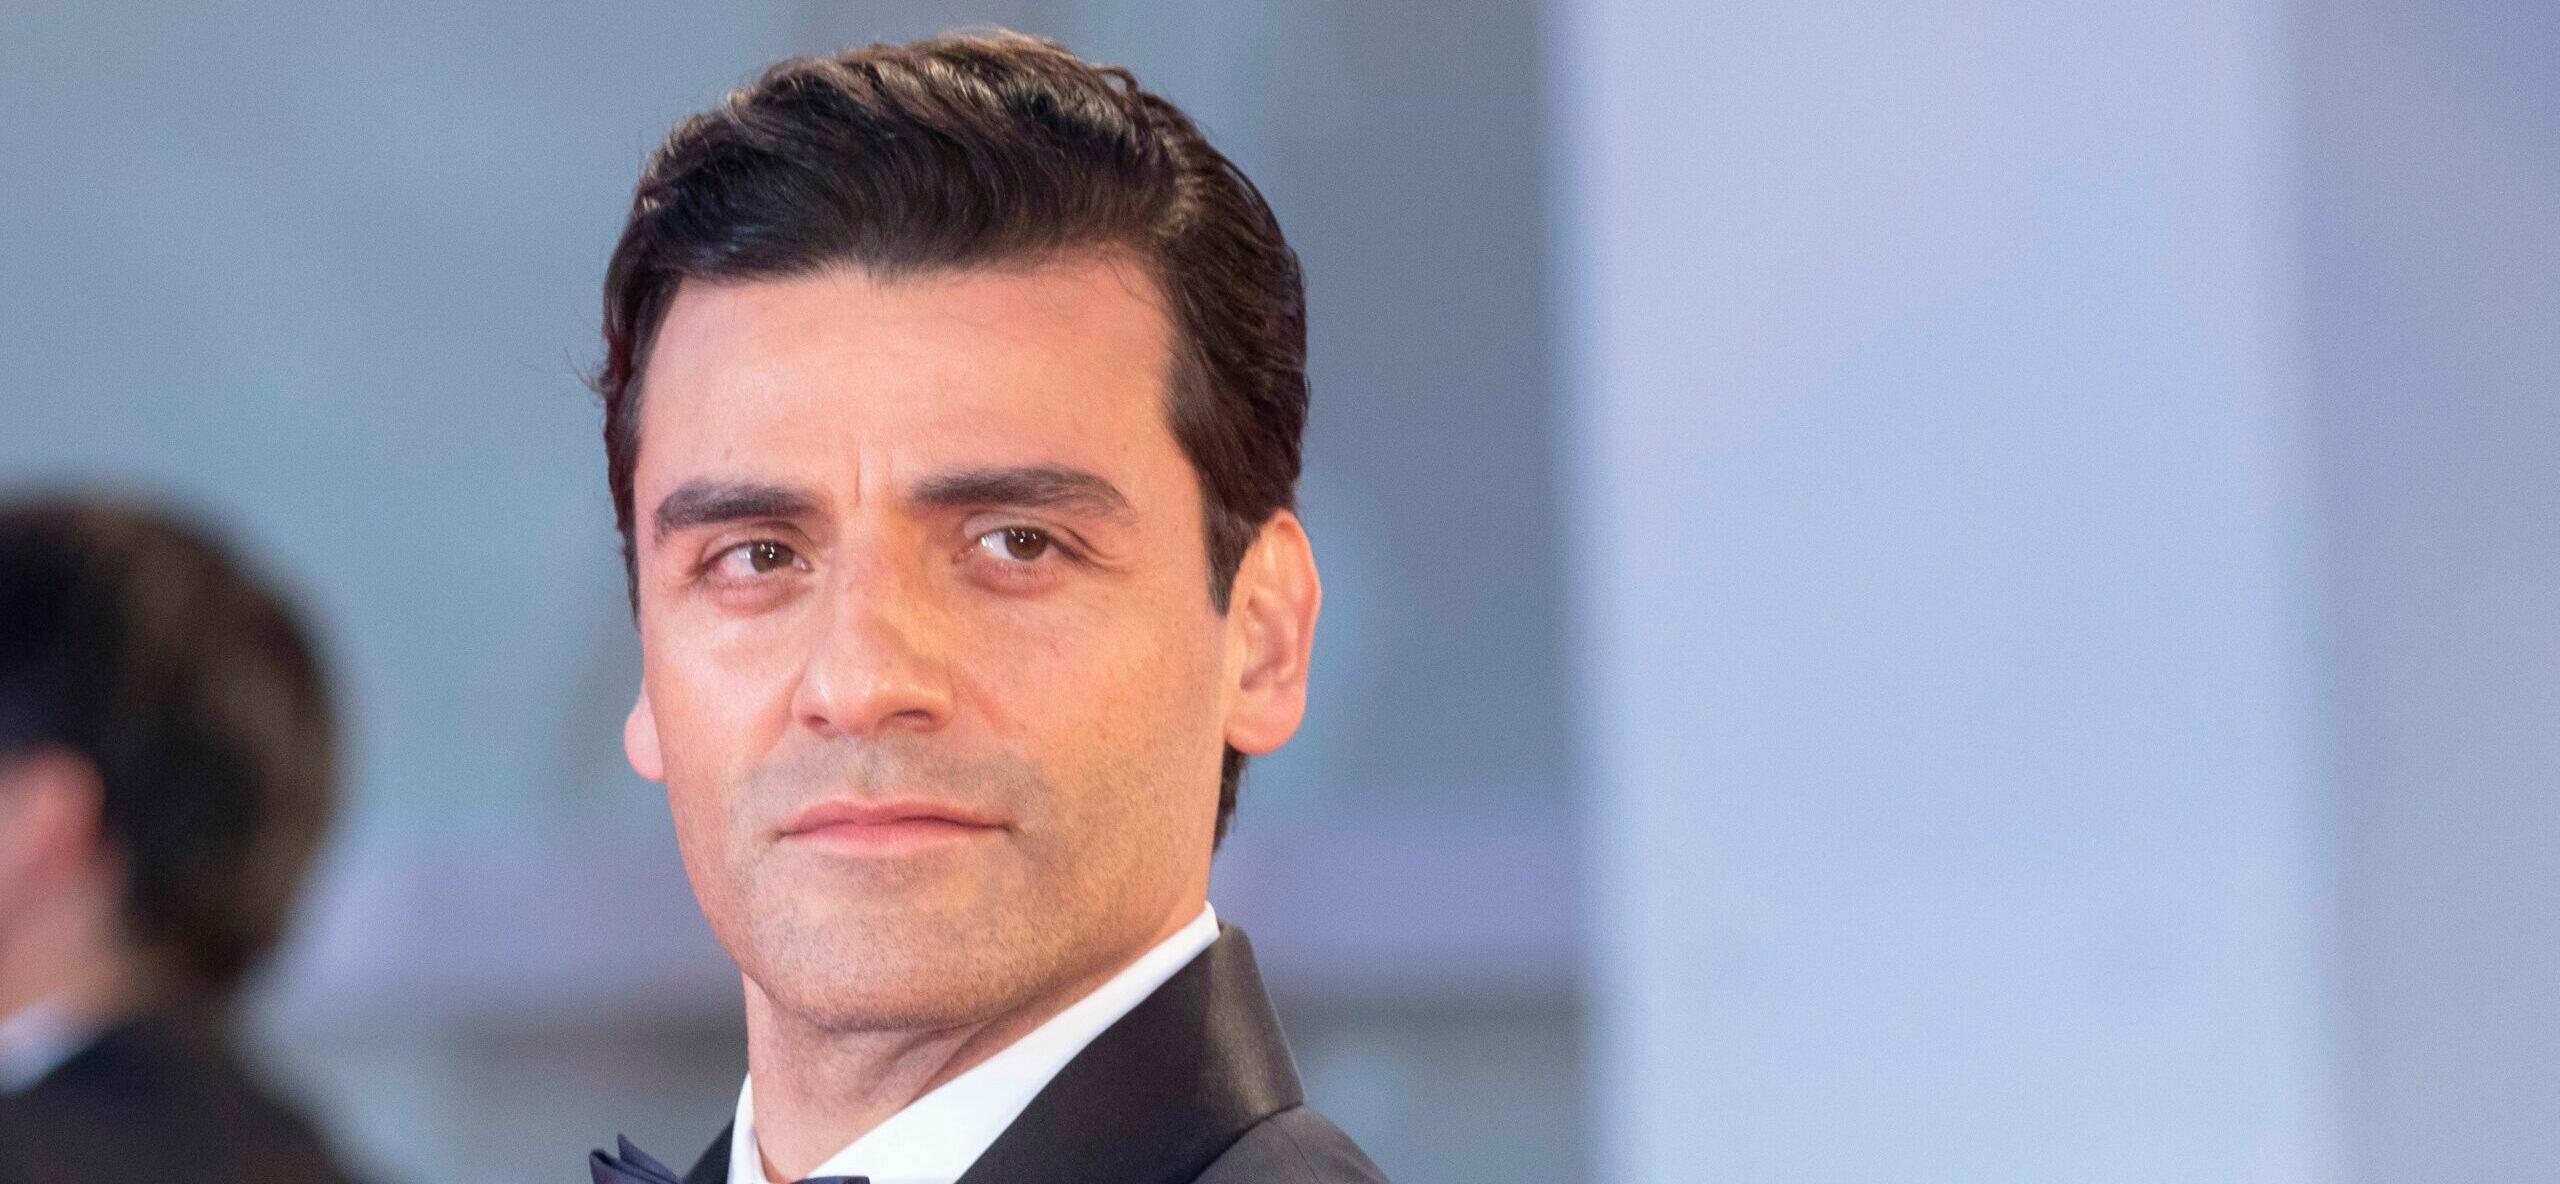 Oscar Isaac at the premiere of 'Scenes From A Marriage (Episodes 1-5)' during the 78th Venice Film Festival at Palazzo del Casino on the Lido in Venice, Italy